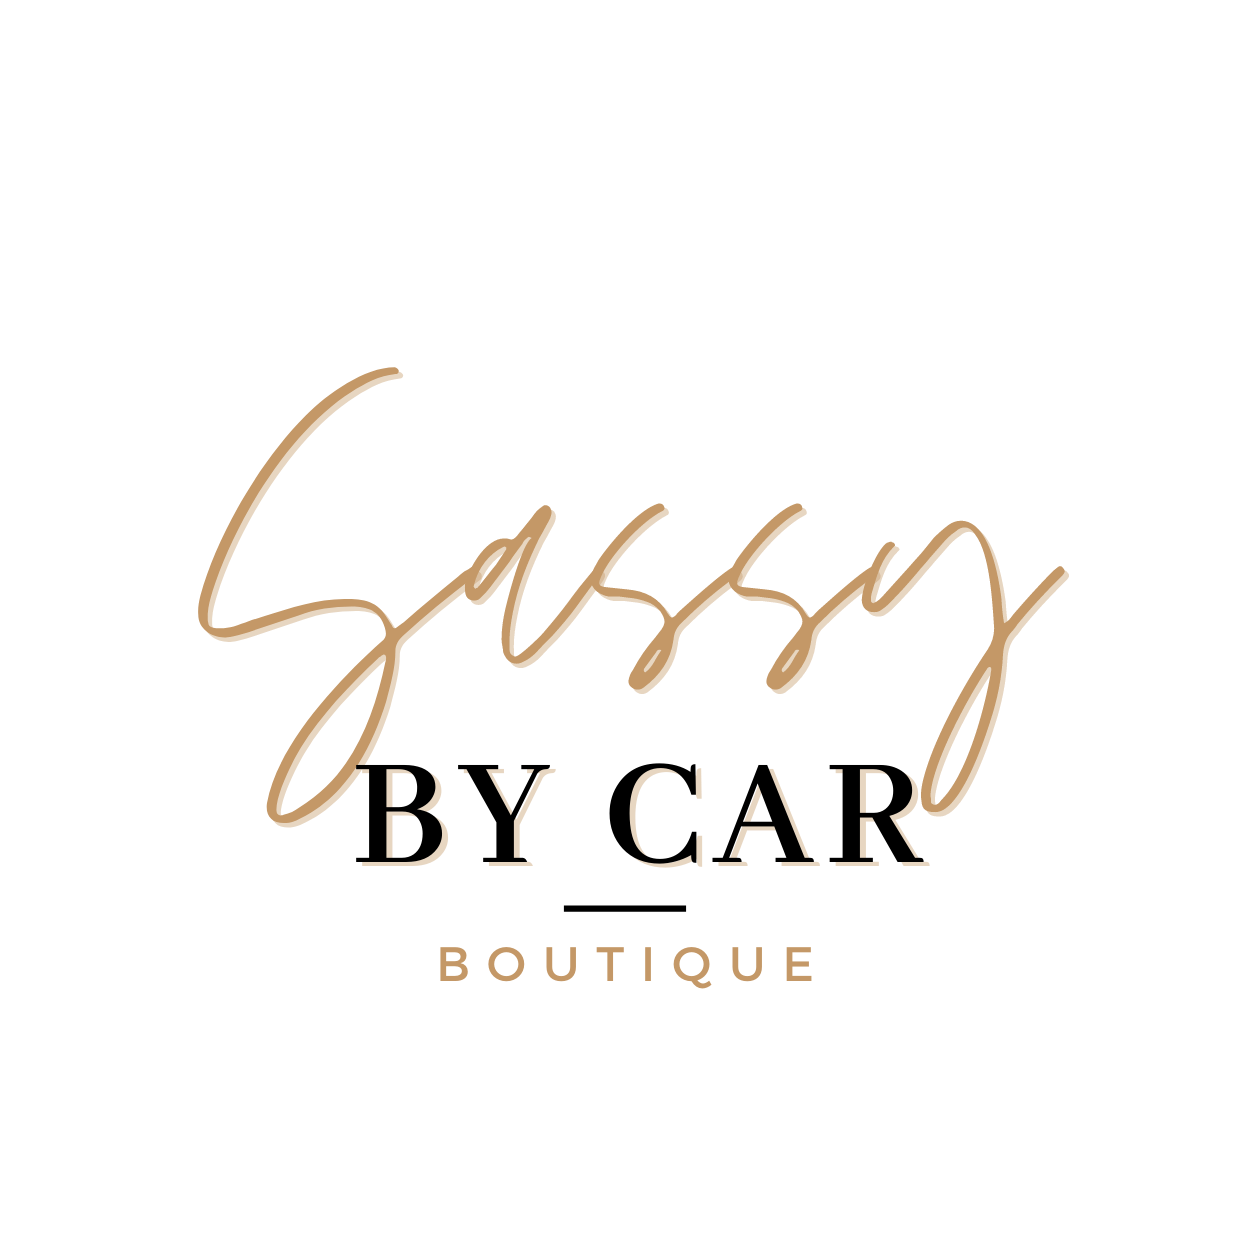 Sassy by Car Boutique - Halara dupe dresses are live on the site